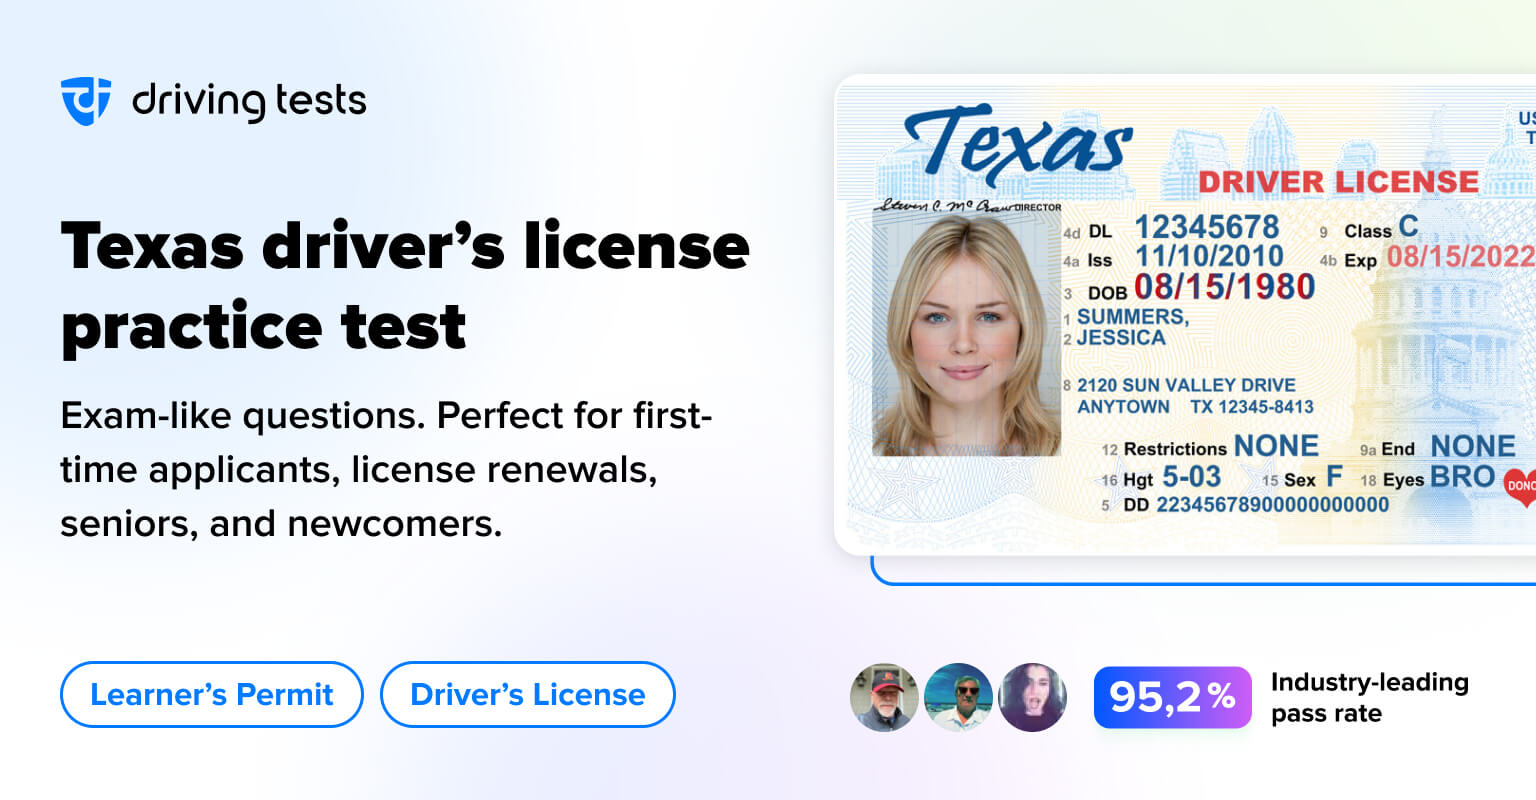 Texas Written Driving Test - Learn About the Texas DPS Driving Test